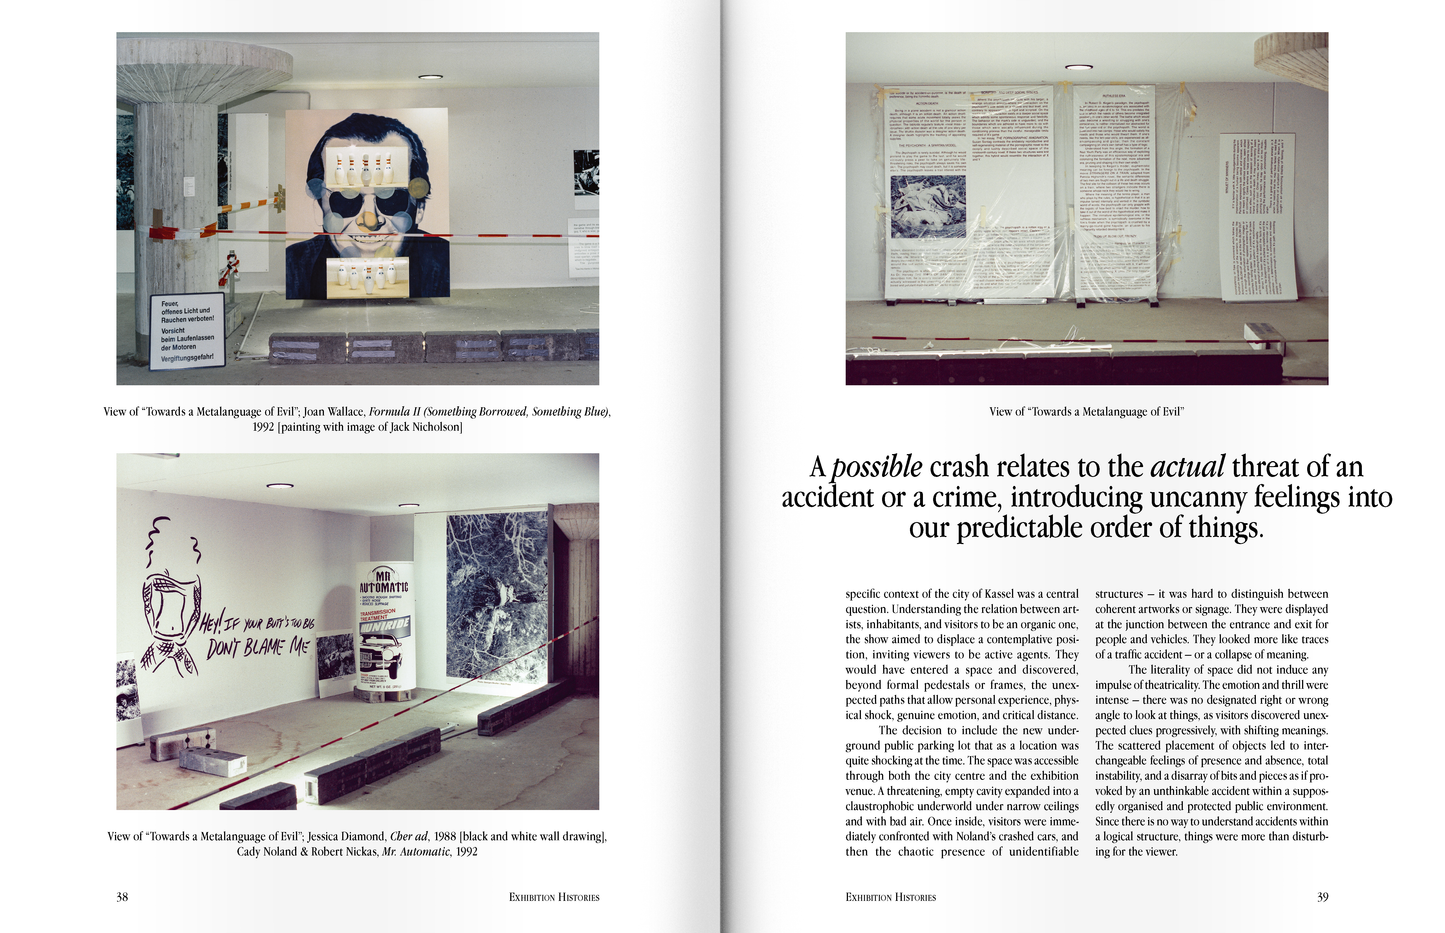 Spike ePaper (ISSUE 72): Art and Crime